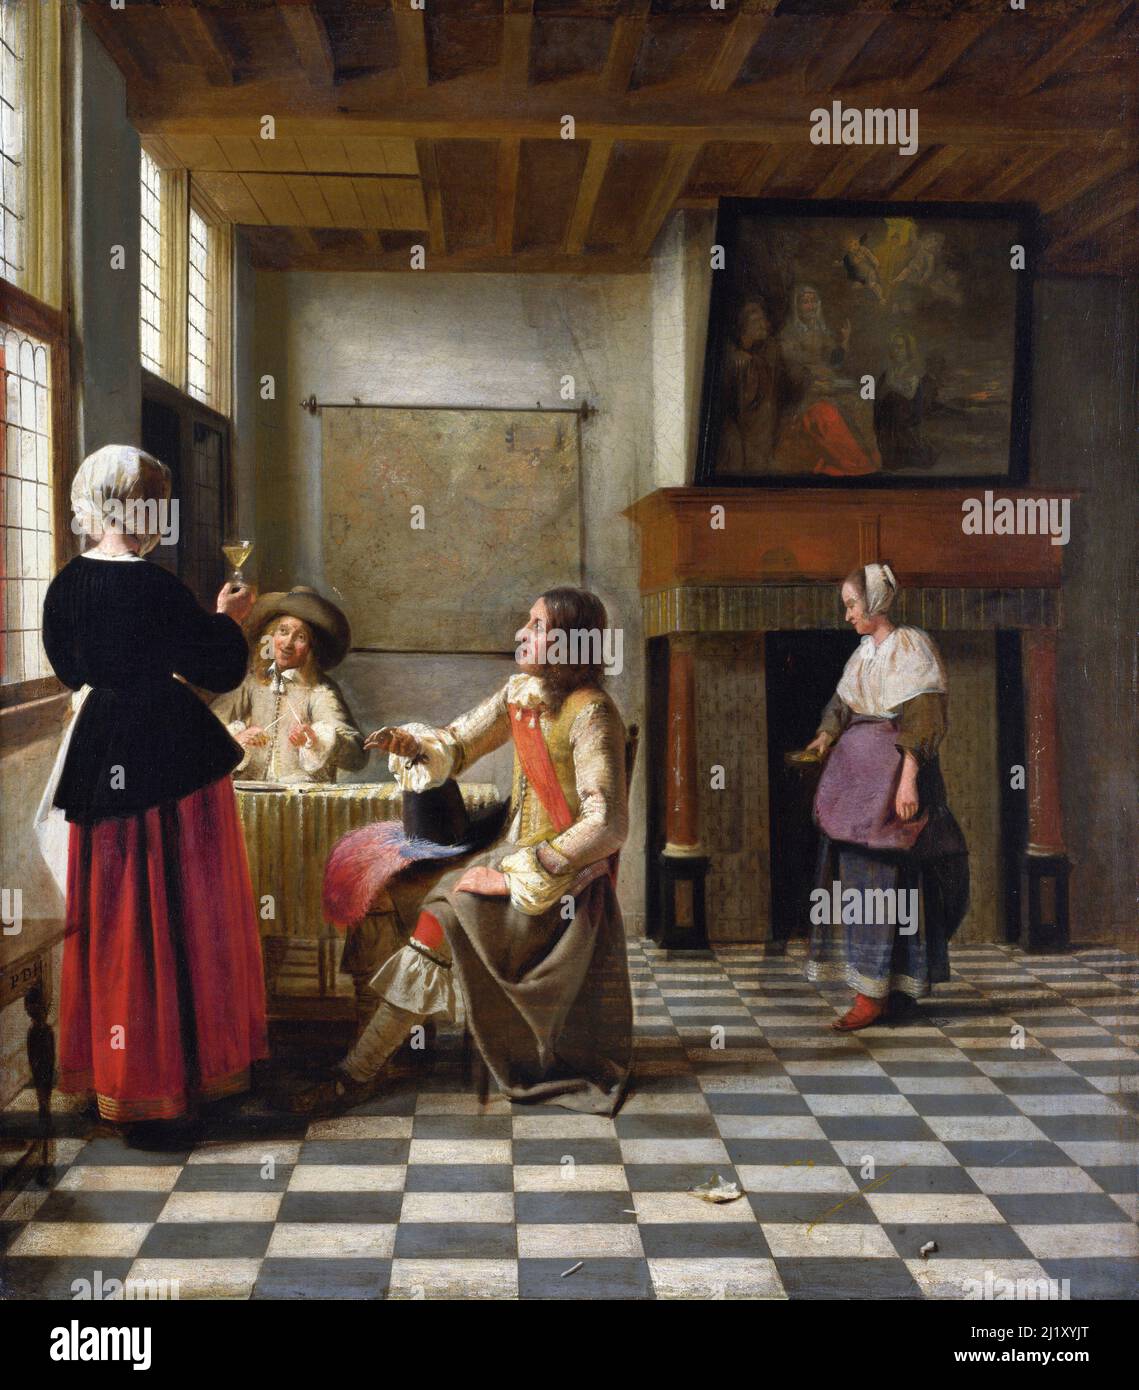 Pieter de Hooch. Painting entitled 'An Interior, with a Woman drinking with Two Men, and a Maidservant' by the Dutch Golden Age painter, Pieter de Hooch (1629-1684), oil on canvas, c. 1658 Stock Photo